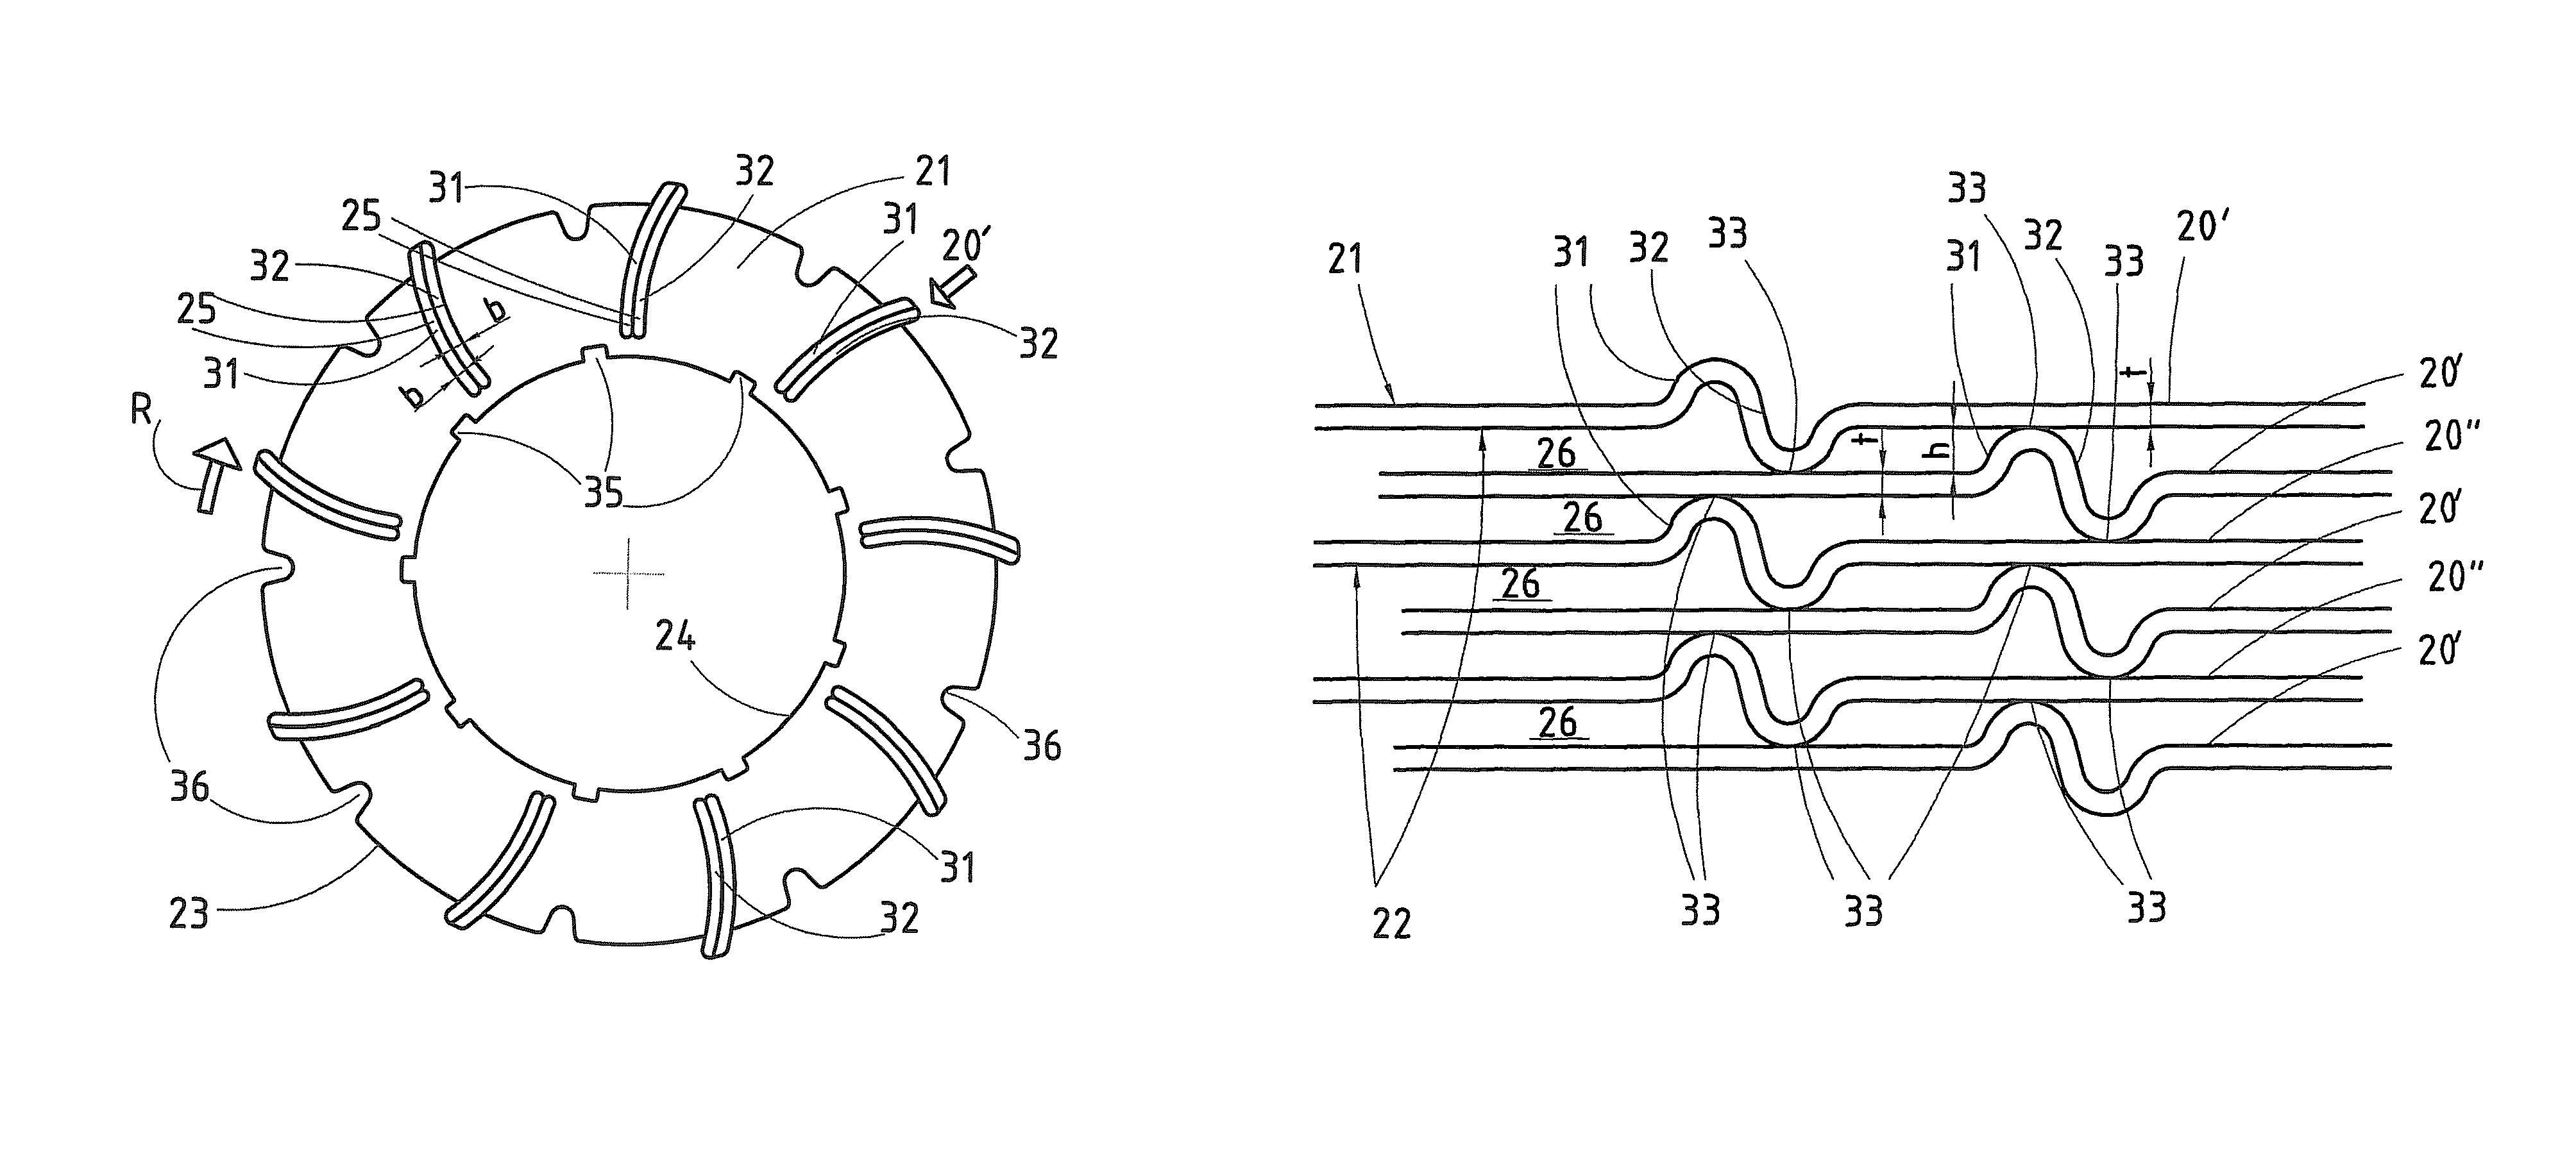 Centrifugal separator separating disc interspace configurations